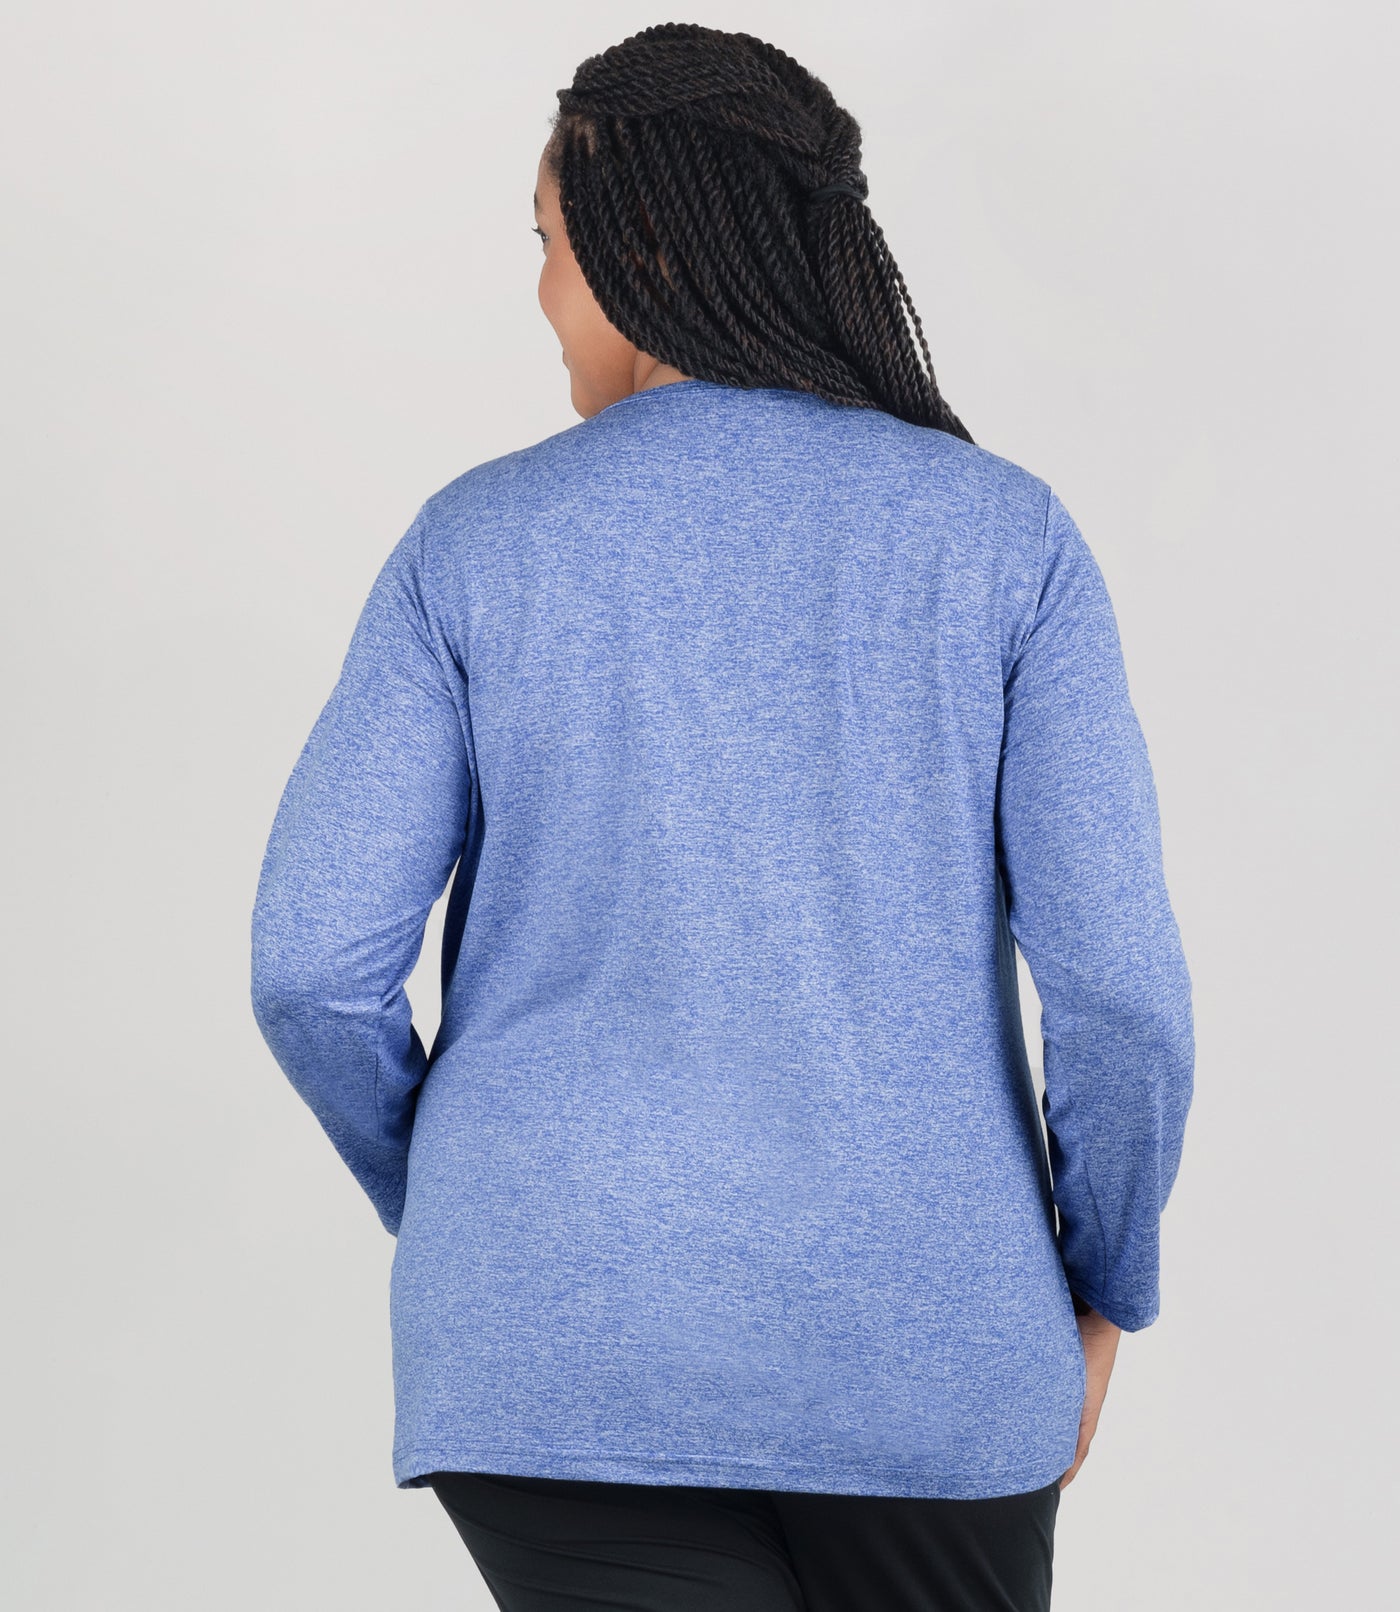 Model, facing back, wearing JunoActive's Softwick Long Sleeve Crew Neck Top in color heather royal.